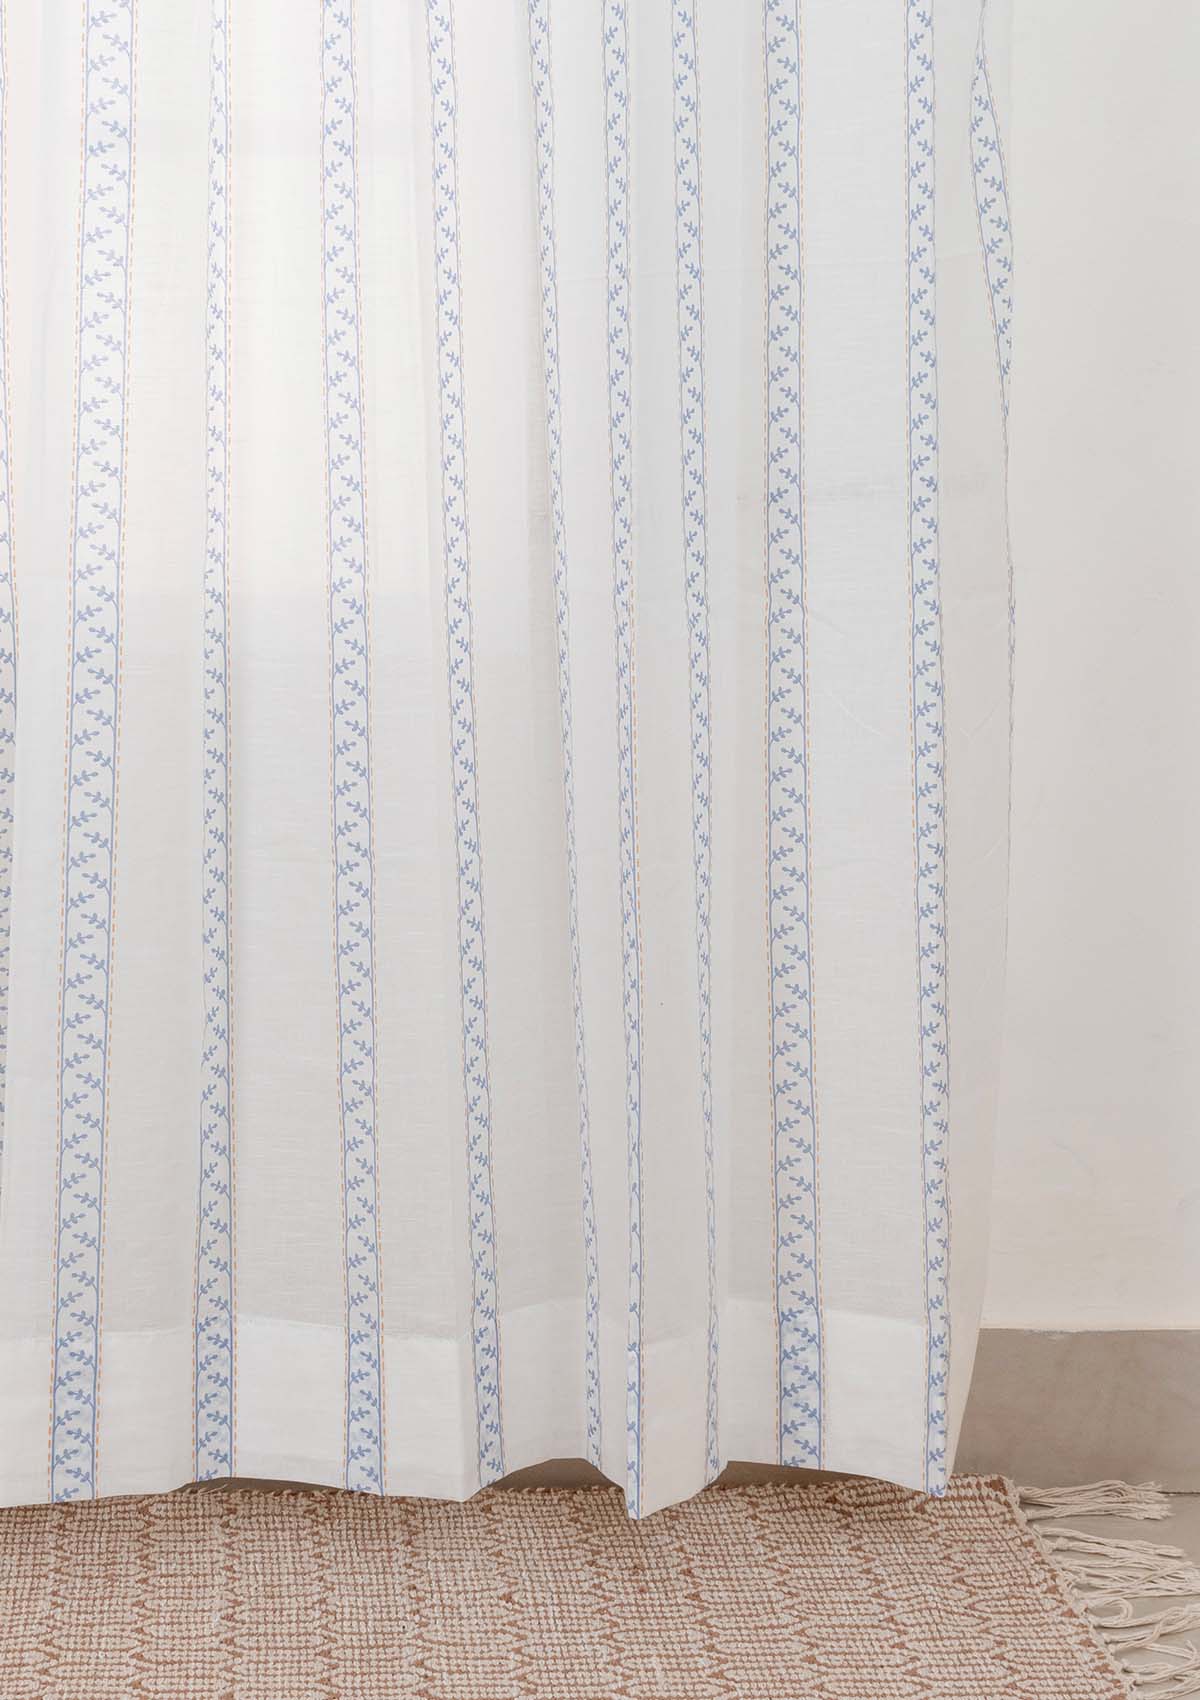 Oriental Stripes printed Sheer Curtain standard size for window and door - Powder Blue